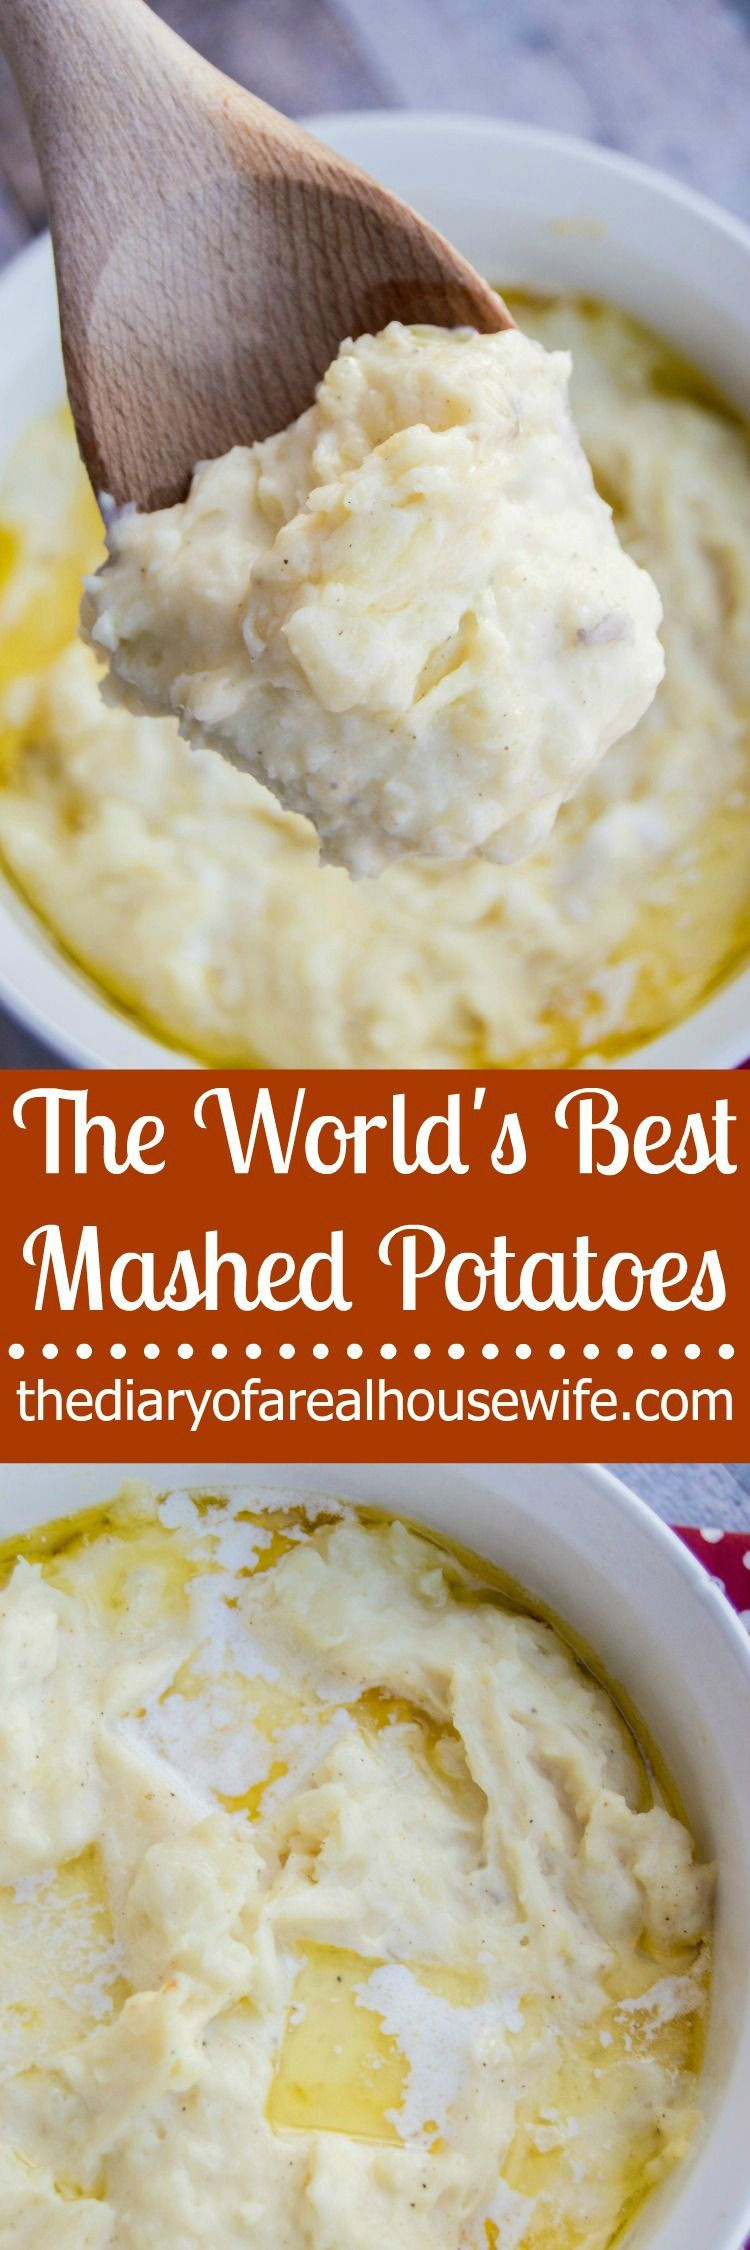 Best Thanksgiving Mashed Potatoes
 If you need a good recipe for Thanksgiving you will want